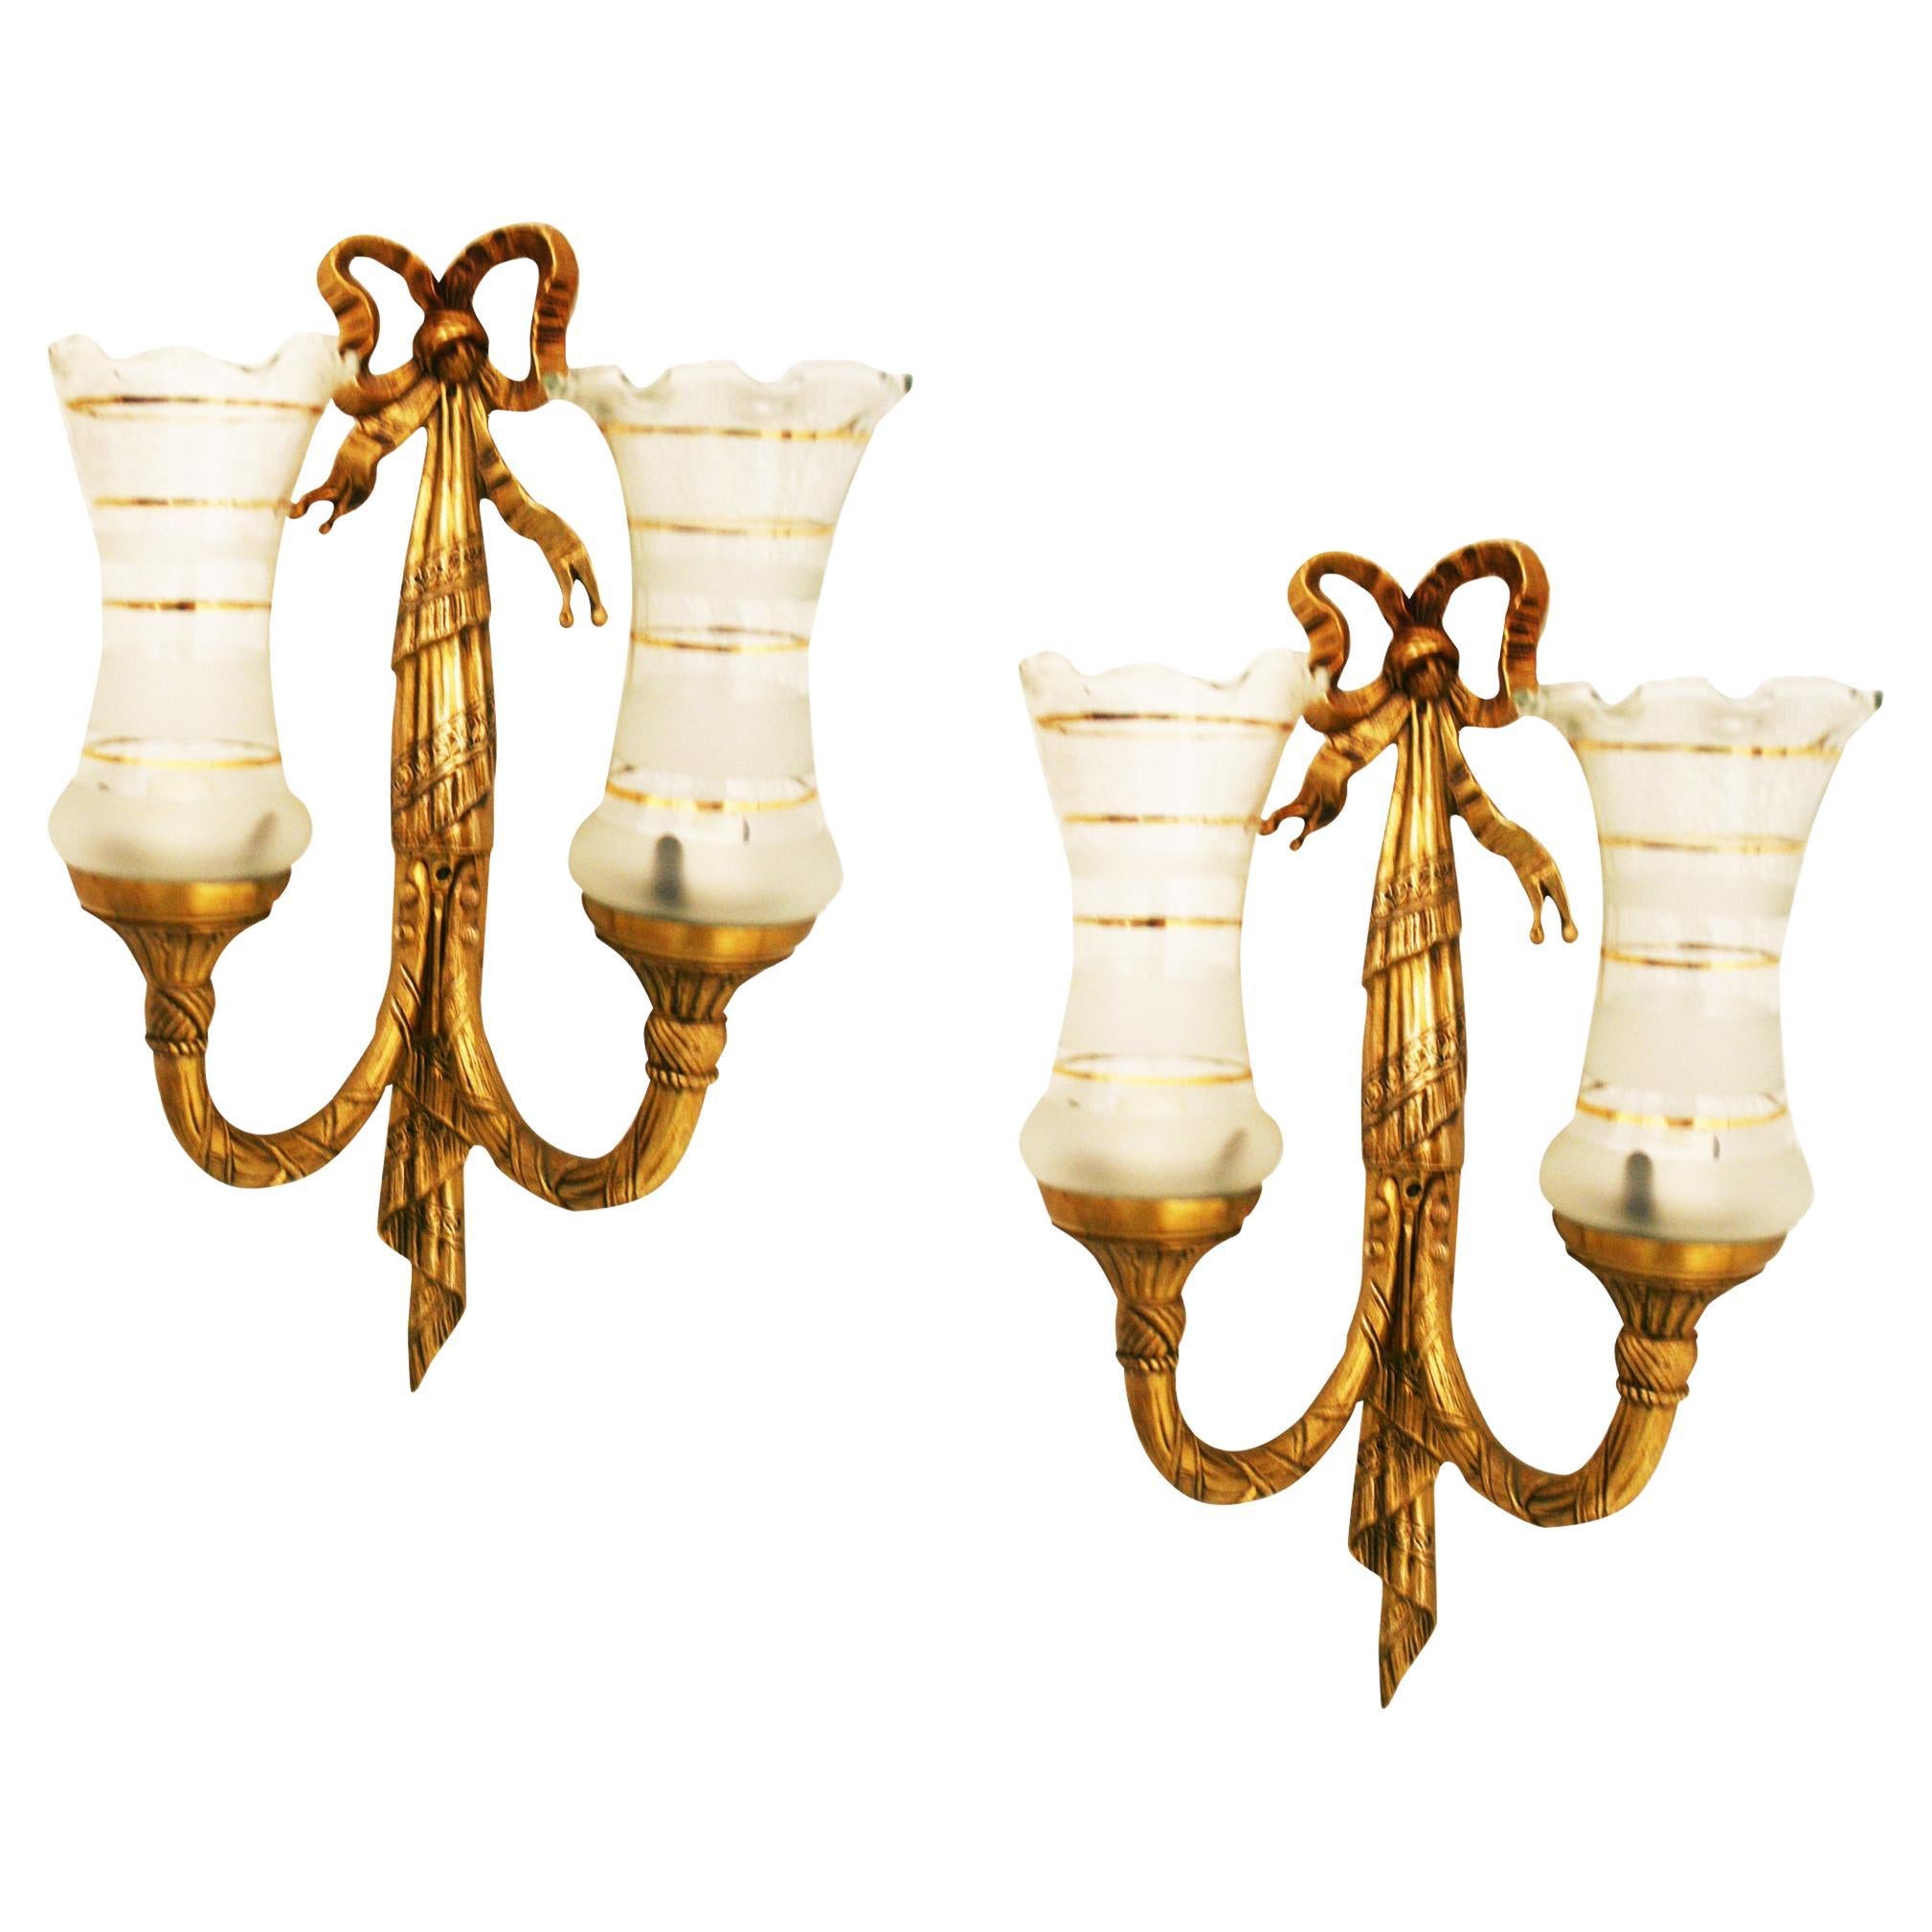  Wall Sconces with Two Lights, Louis XVI Style Golden Bronze or Brass Pair For Sale